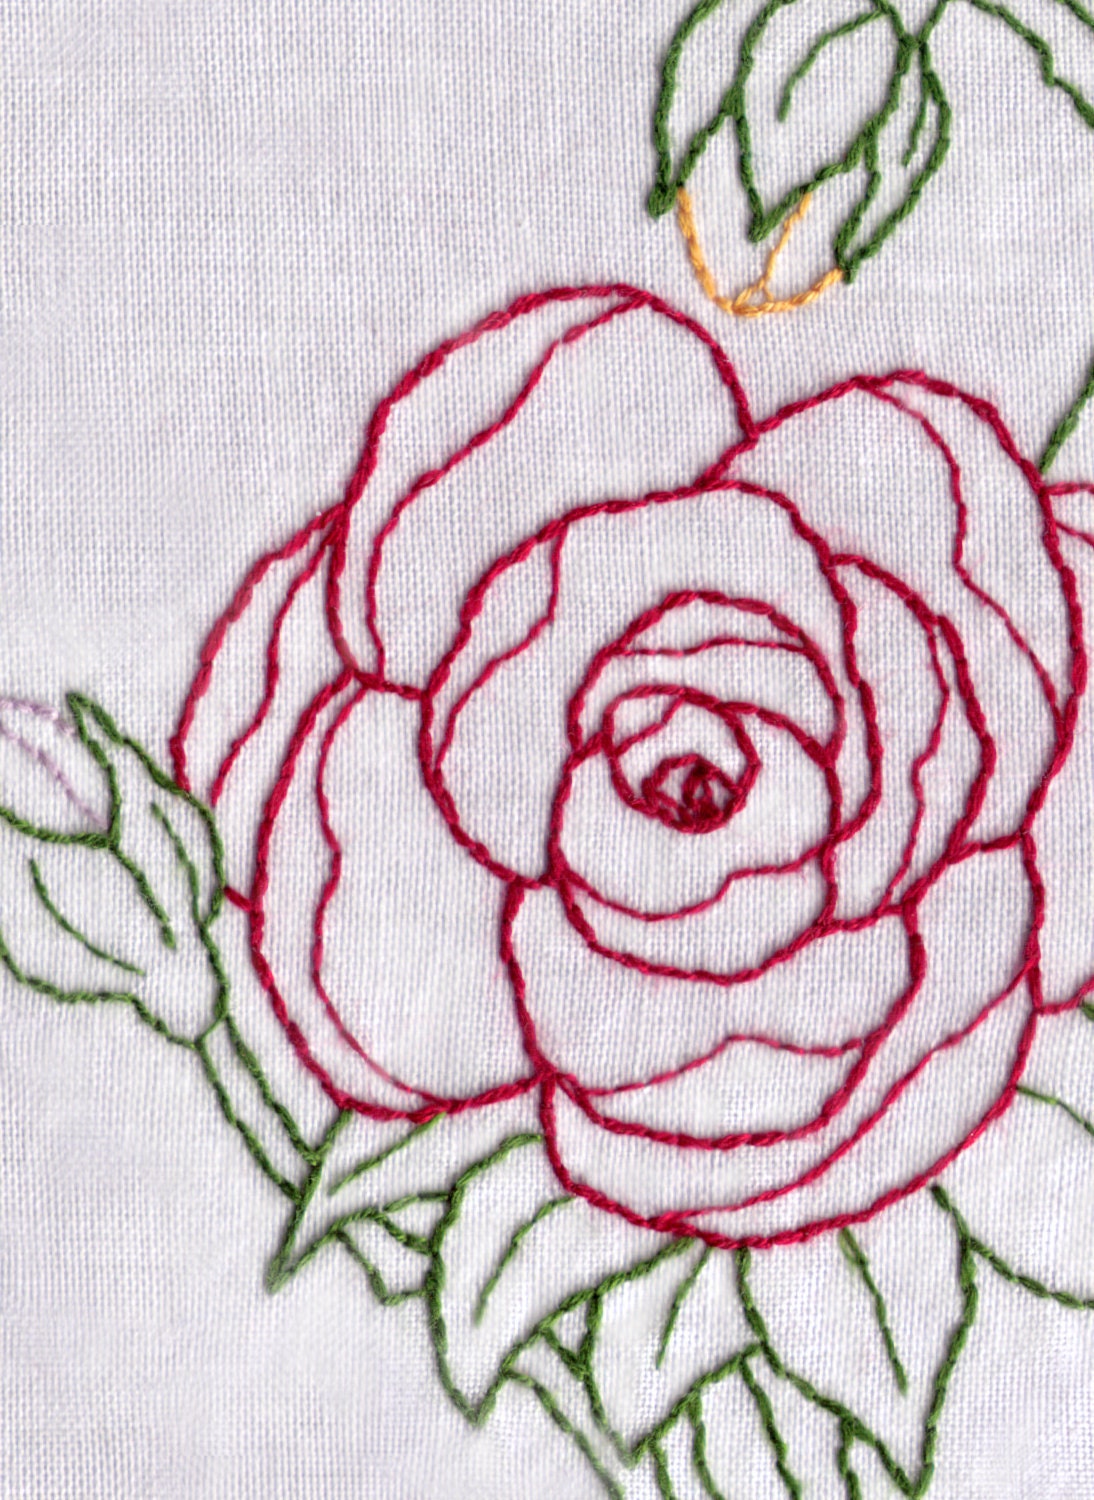 Rose Hand Embroidery Pattern PDF Rose Blossom and 2 Buds | Etsy